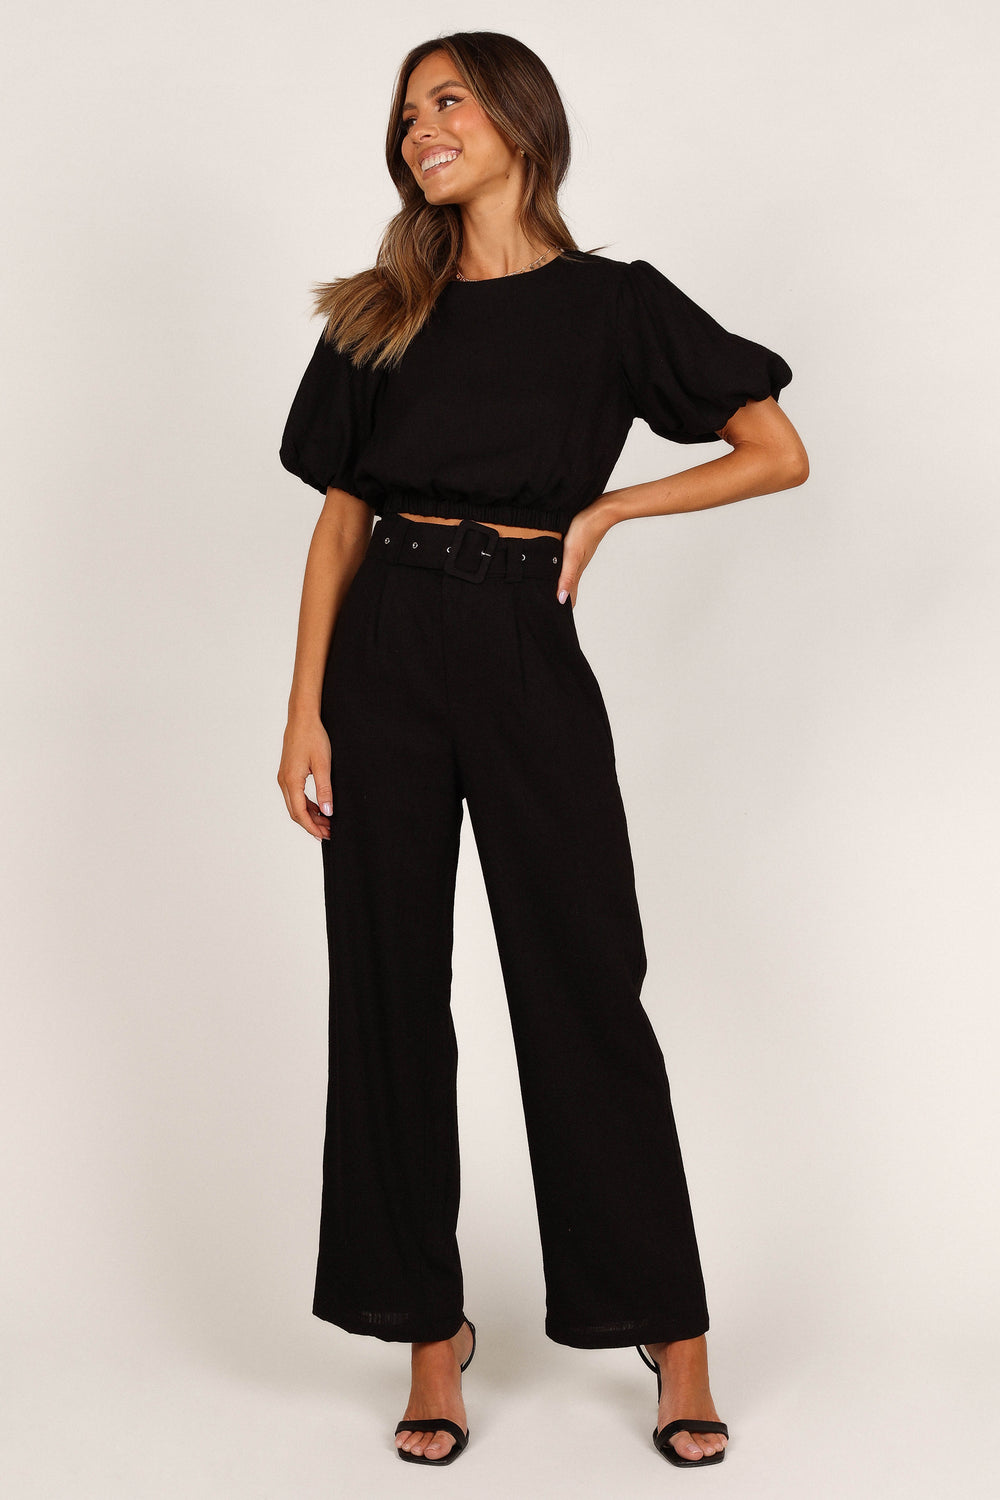 Petal and Pup USA SETS Blakely Pant Two Piece Set - Black